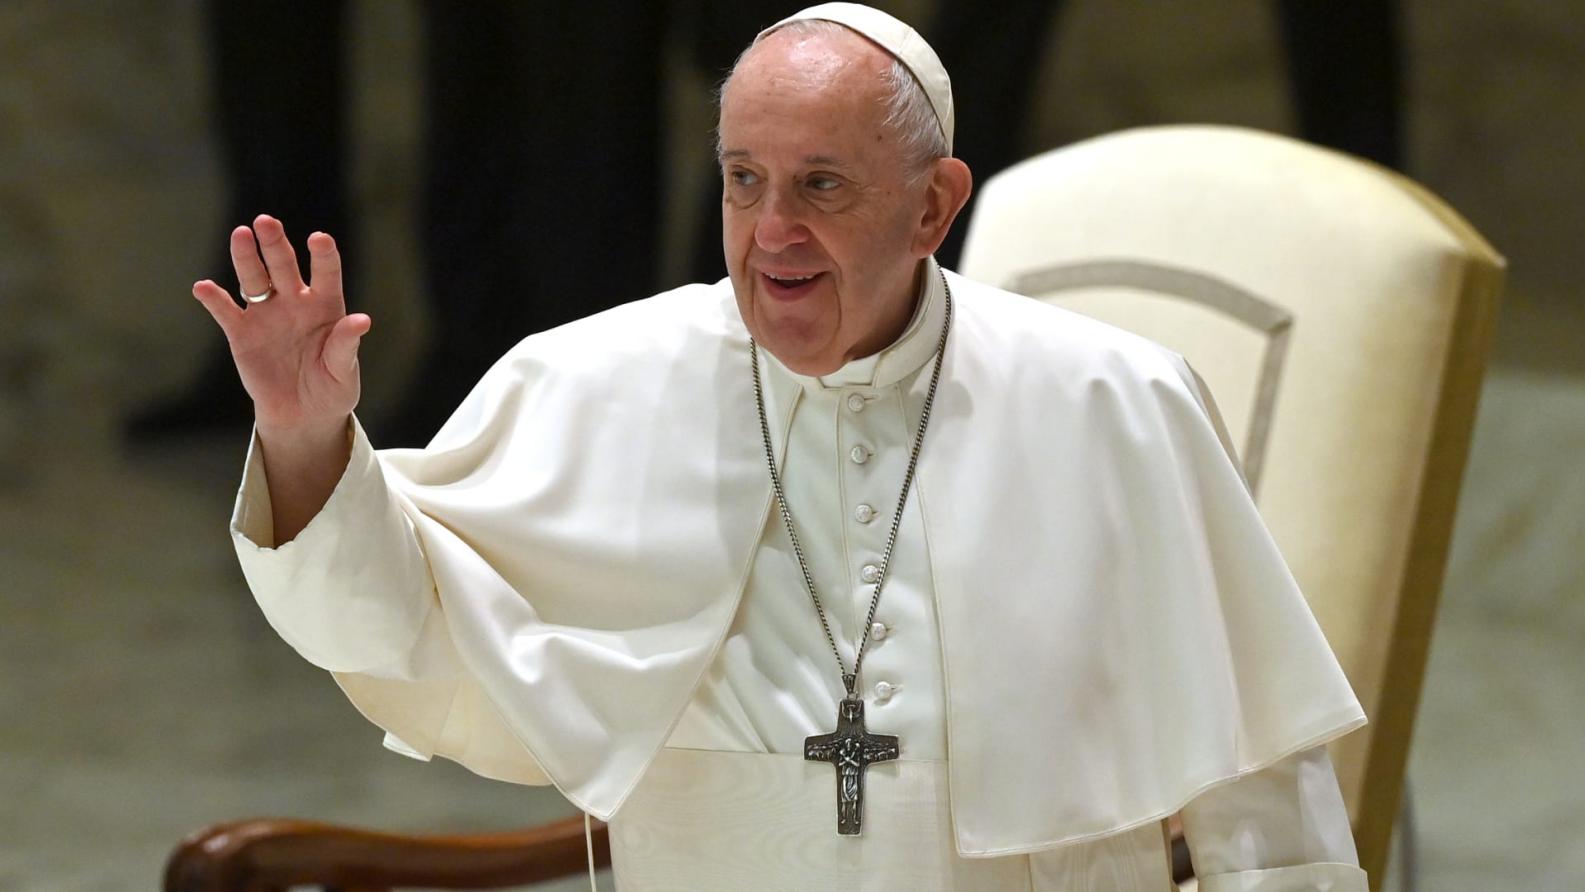 WJWC: Freedom of opinion and expression should be at high priority of Pope's visit to Bahrain